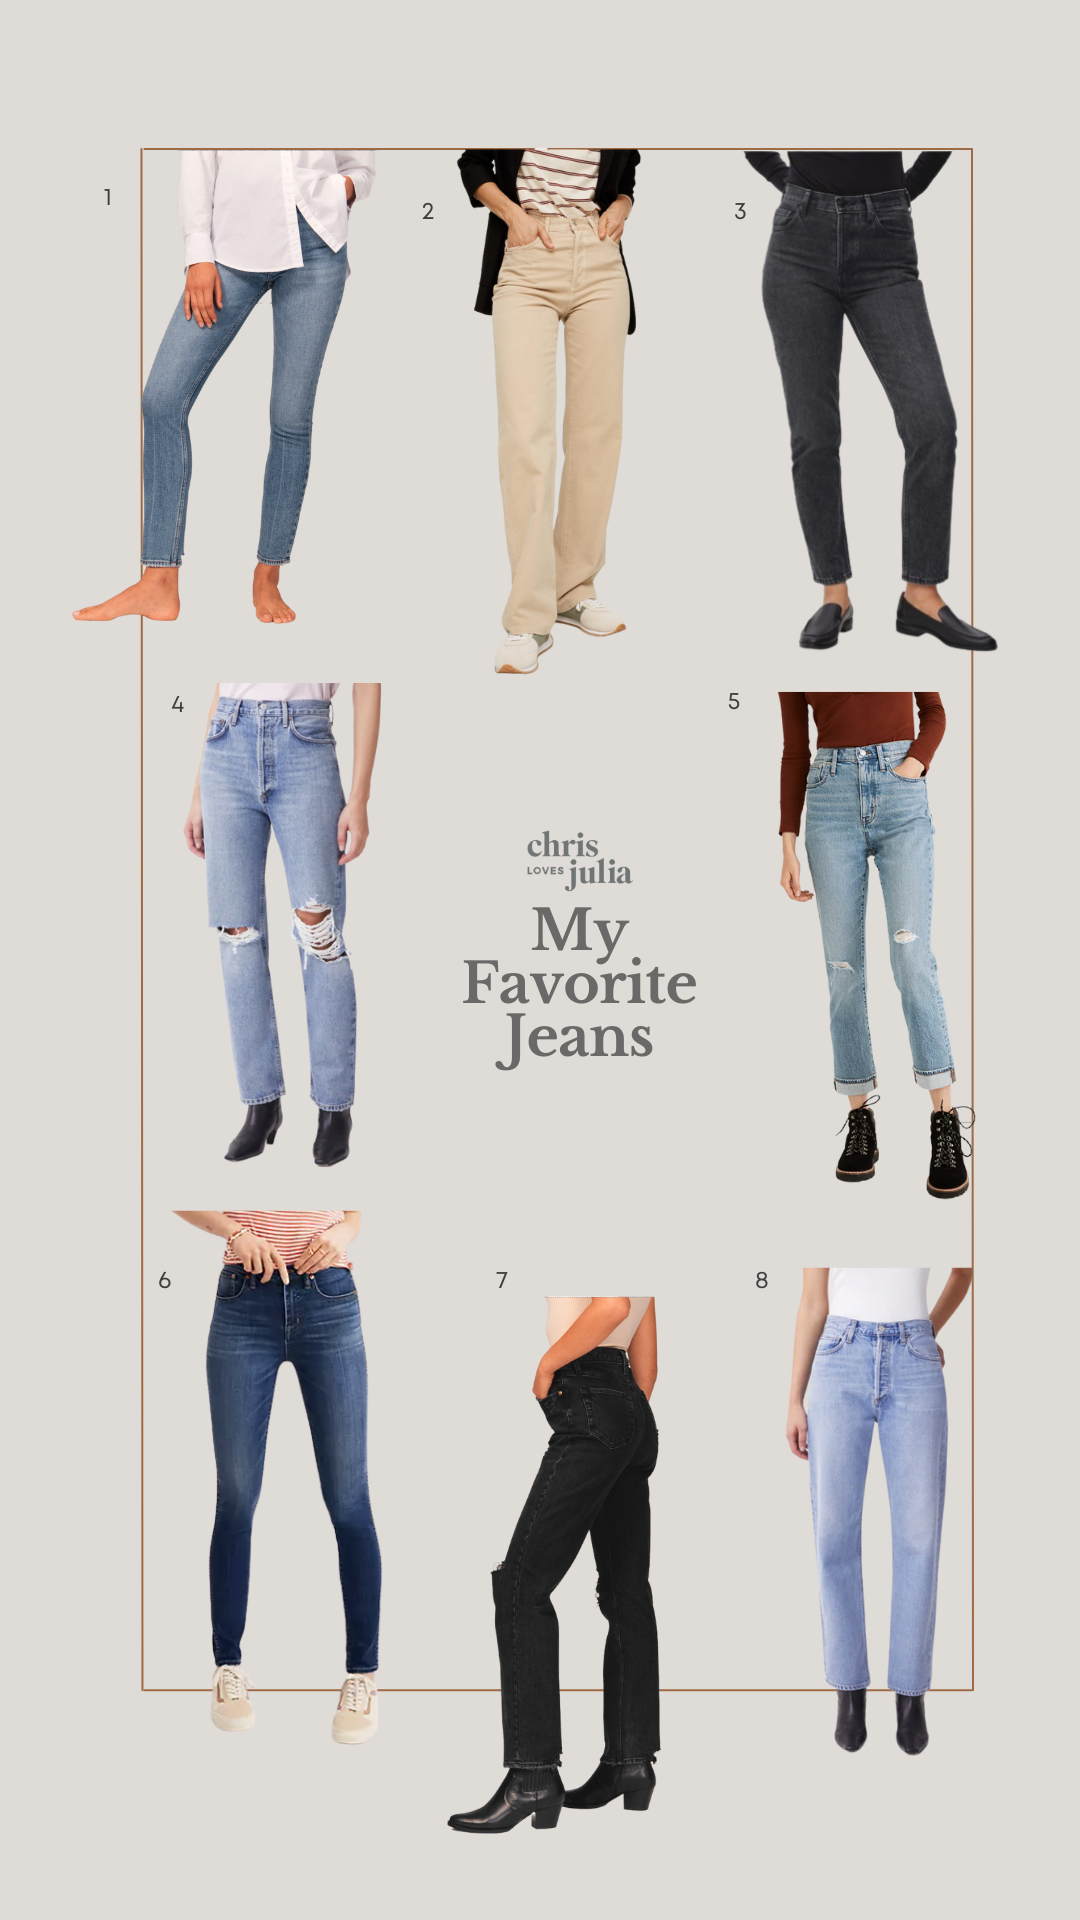 Your perfect jeans do exist – you just need to know what to look for, Jeans